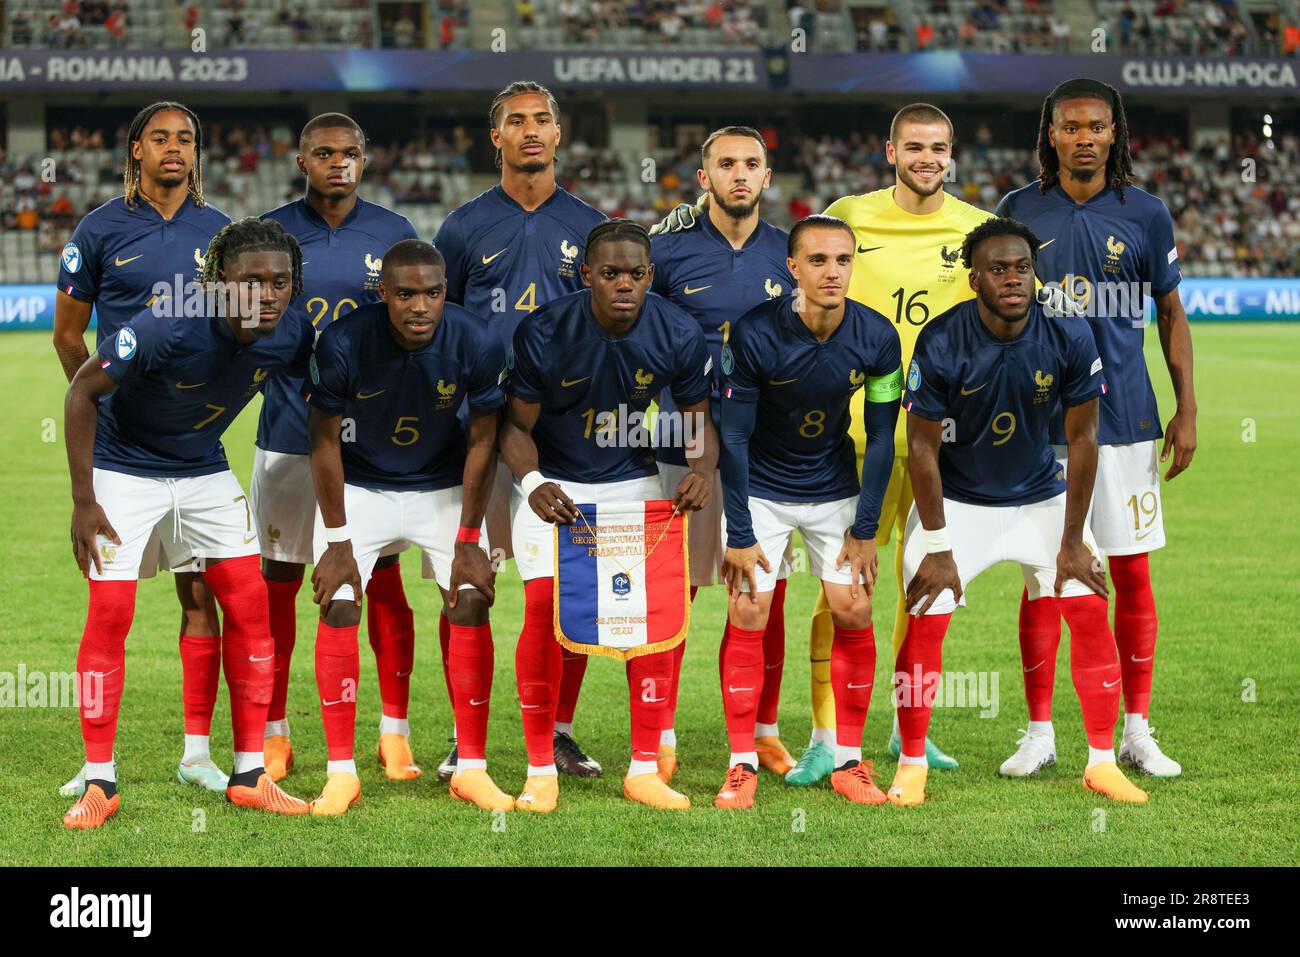 Cluj Napoca, Romania. 22nd June, 2023. France U21 for team photo lined up during the first qualifying round UEFA European Under-21 Championship 2023 soccer match Italy U21 vs. France U21 at the Cluj Arena stadium in Cluj Napoca, Romania, 22nd of June 2023 Credit: Live Media Publishing Group/Alamy Live News Stock Photo